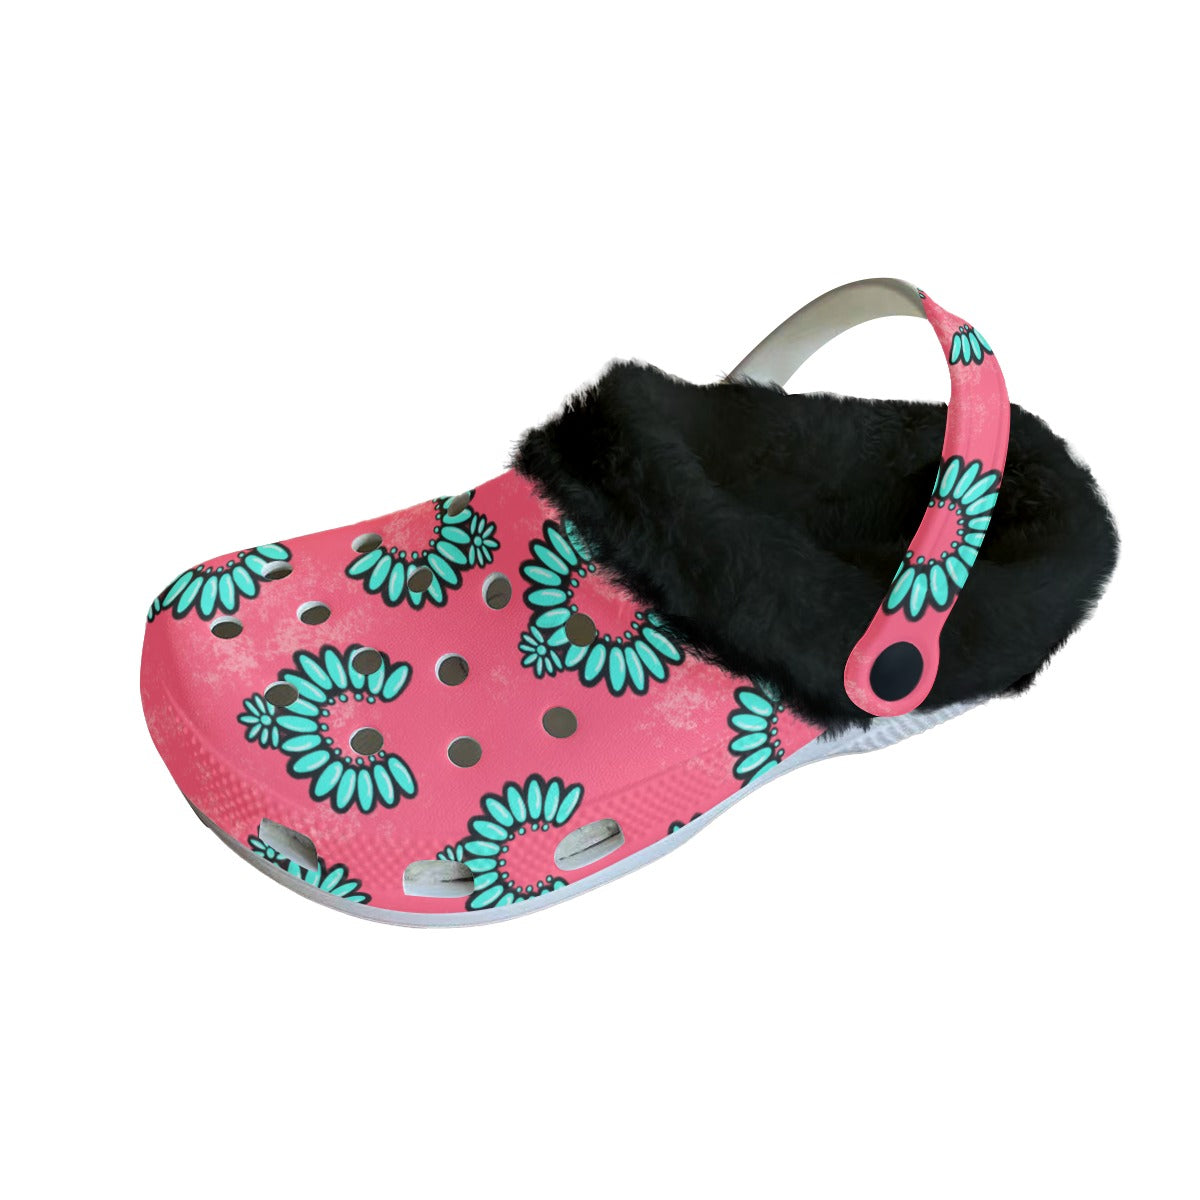 Hot pink & Turquoise jewls Women's Classic Clogs with Fleece 15-20 business day turnaround time